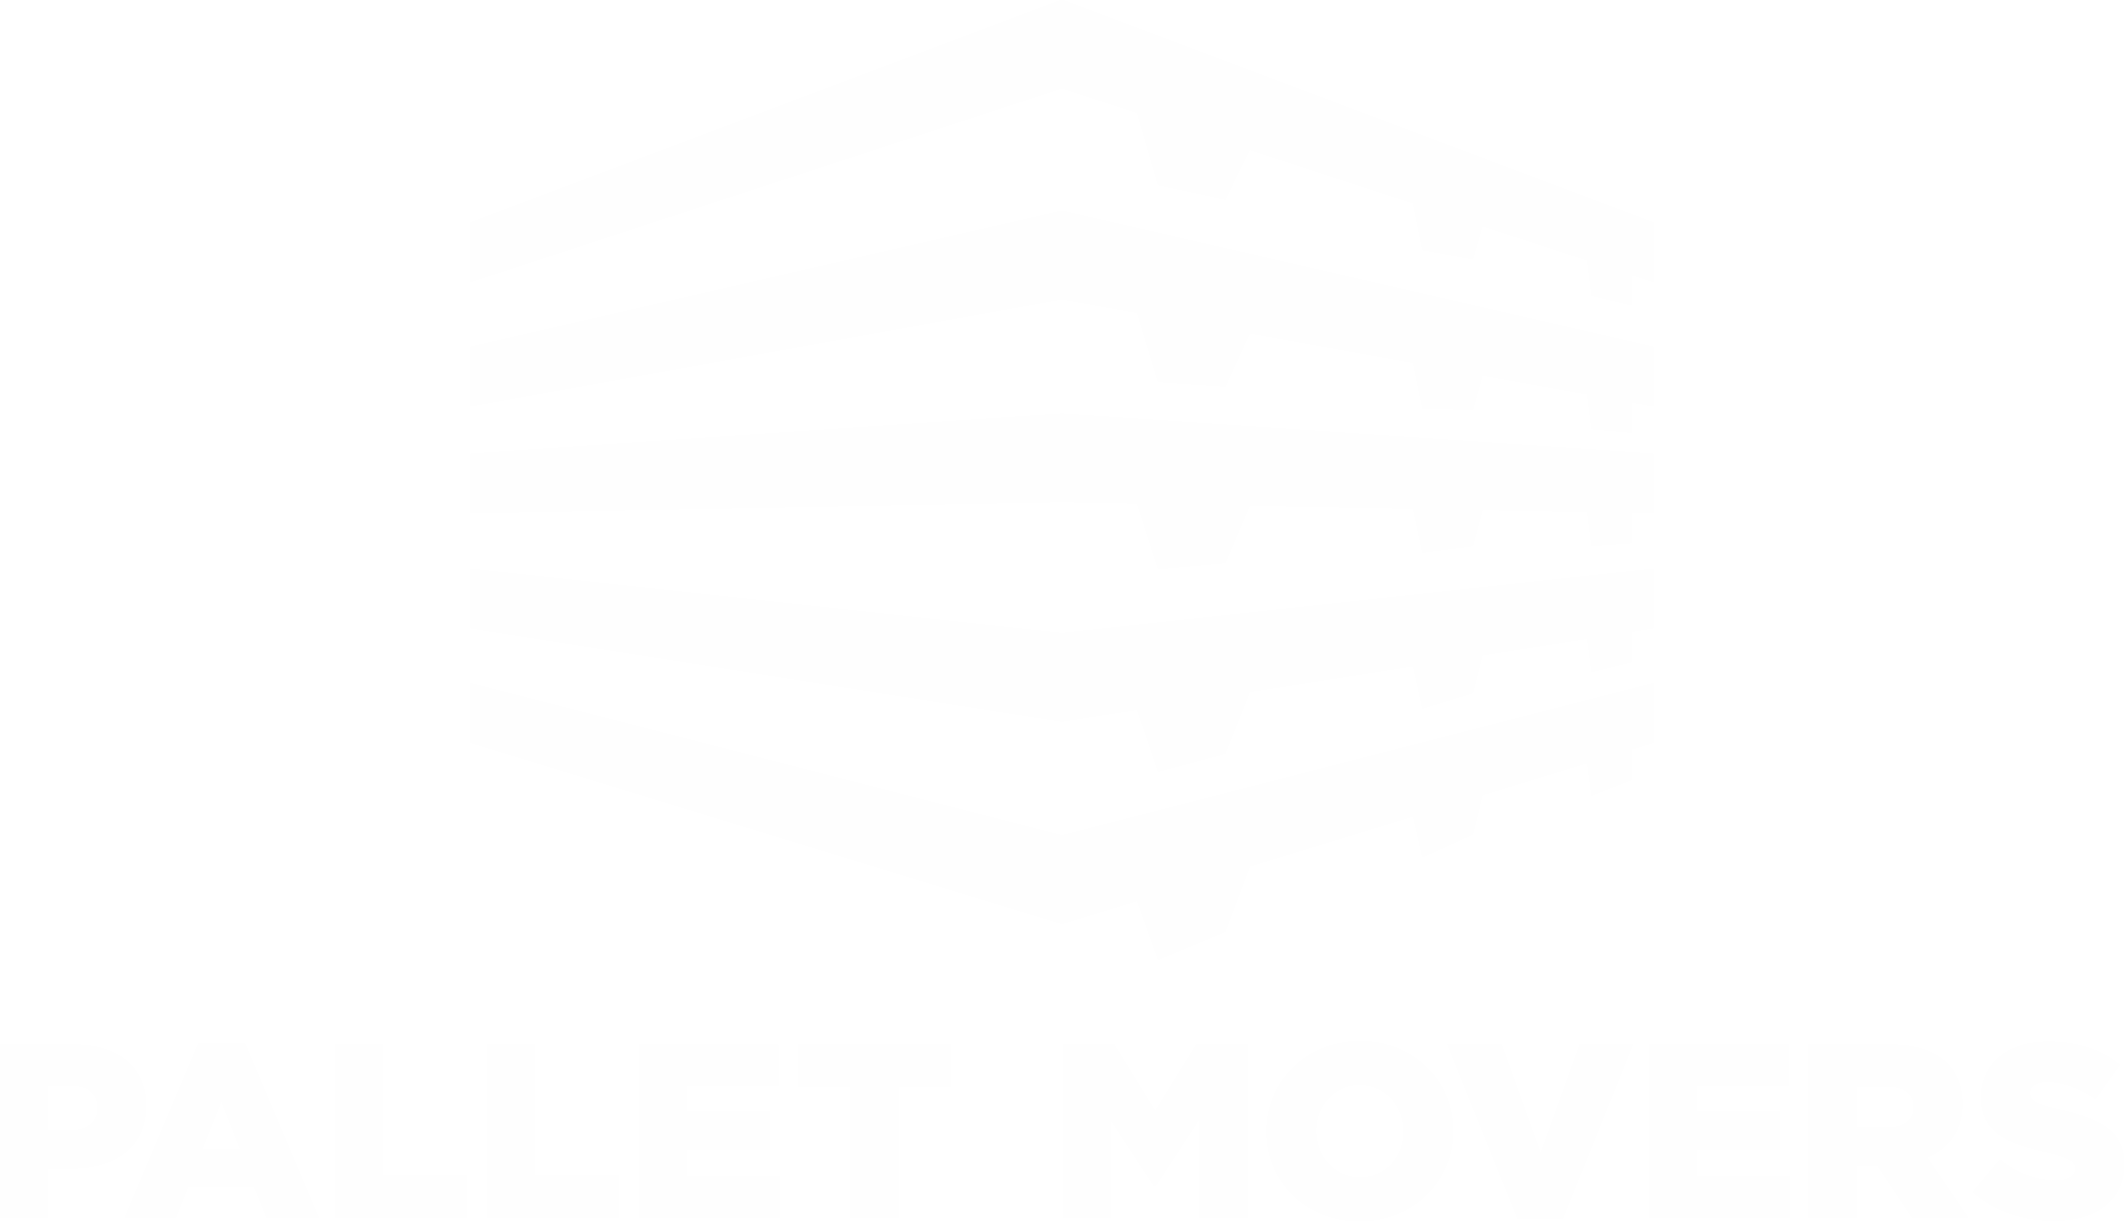 Pallet Movers